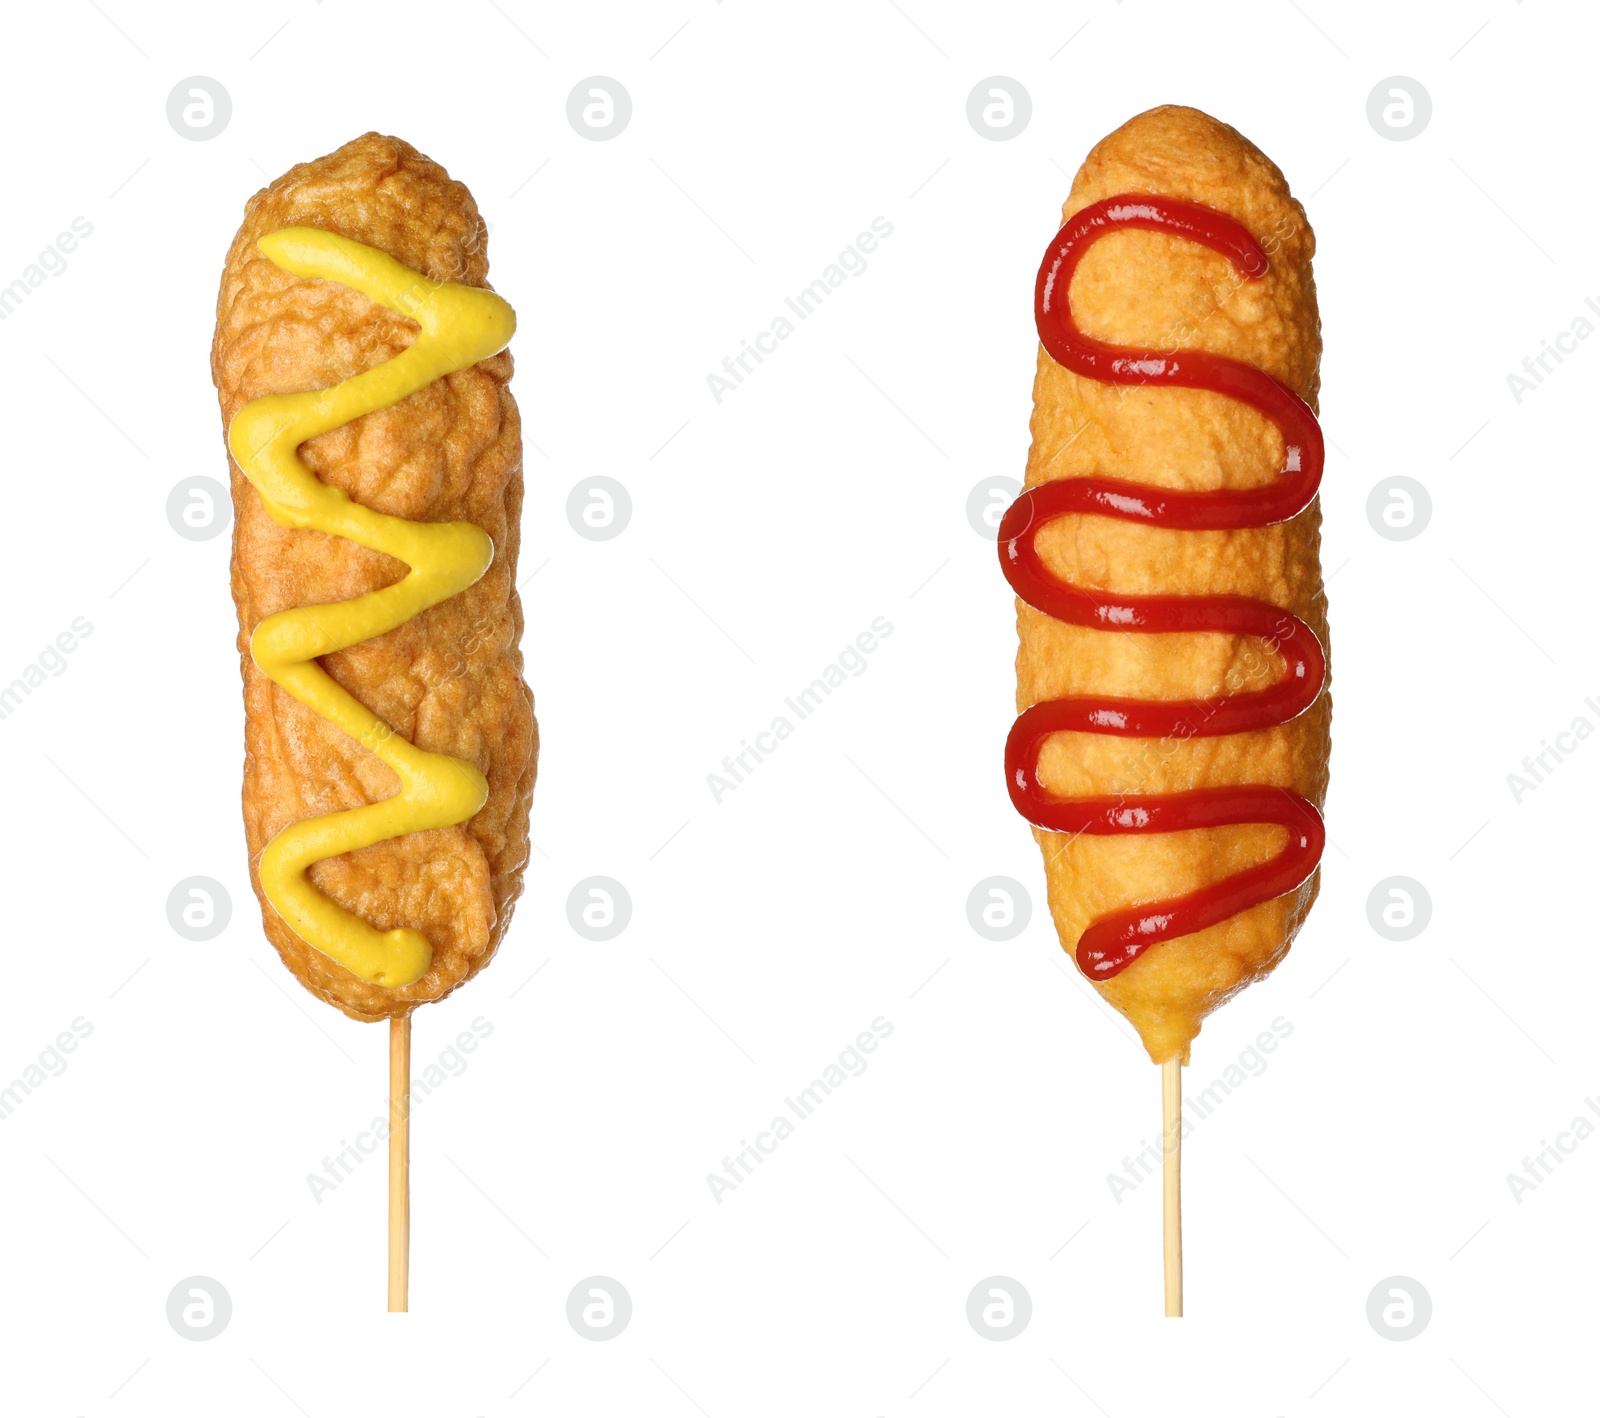 Image of Delicious deep fried corn dogs on white background, collage